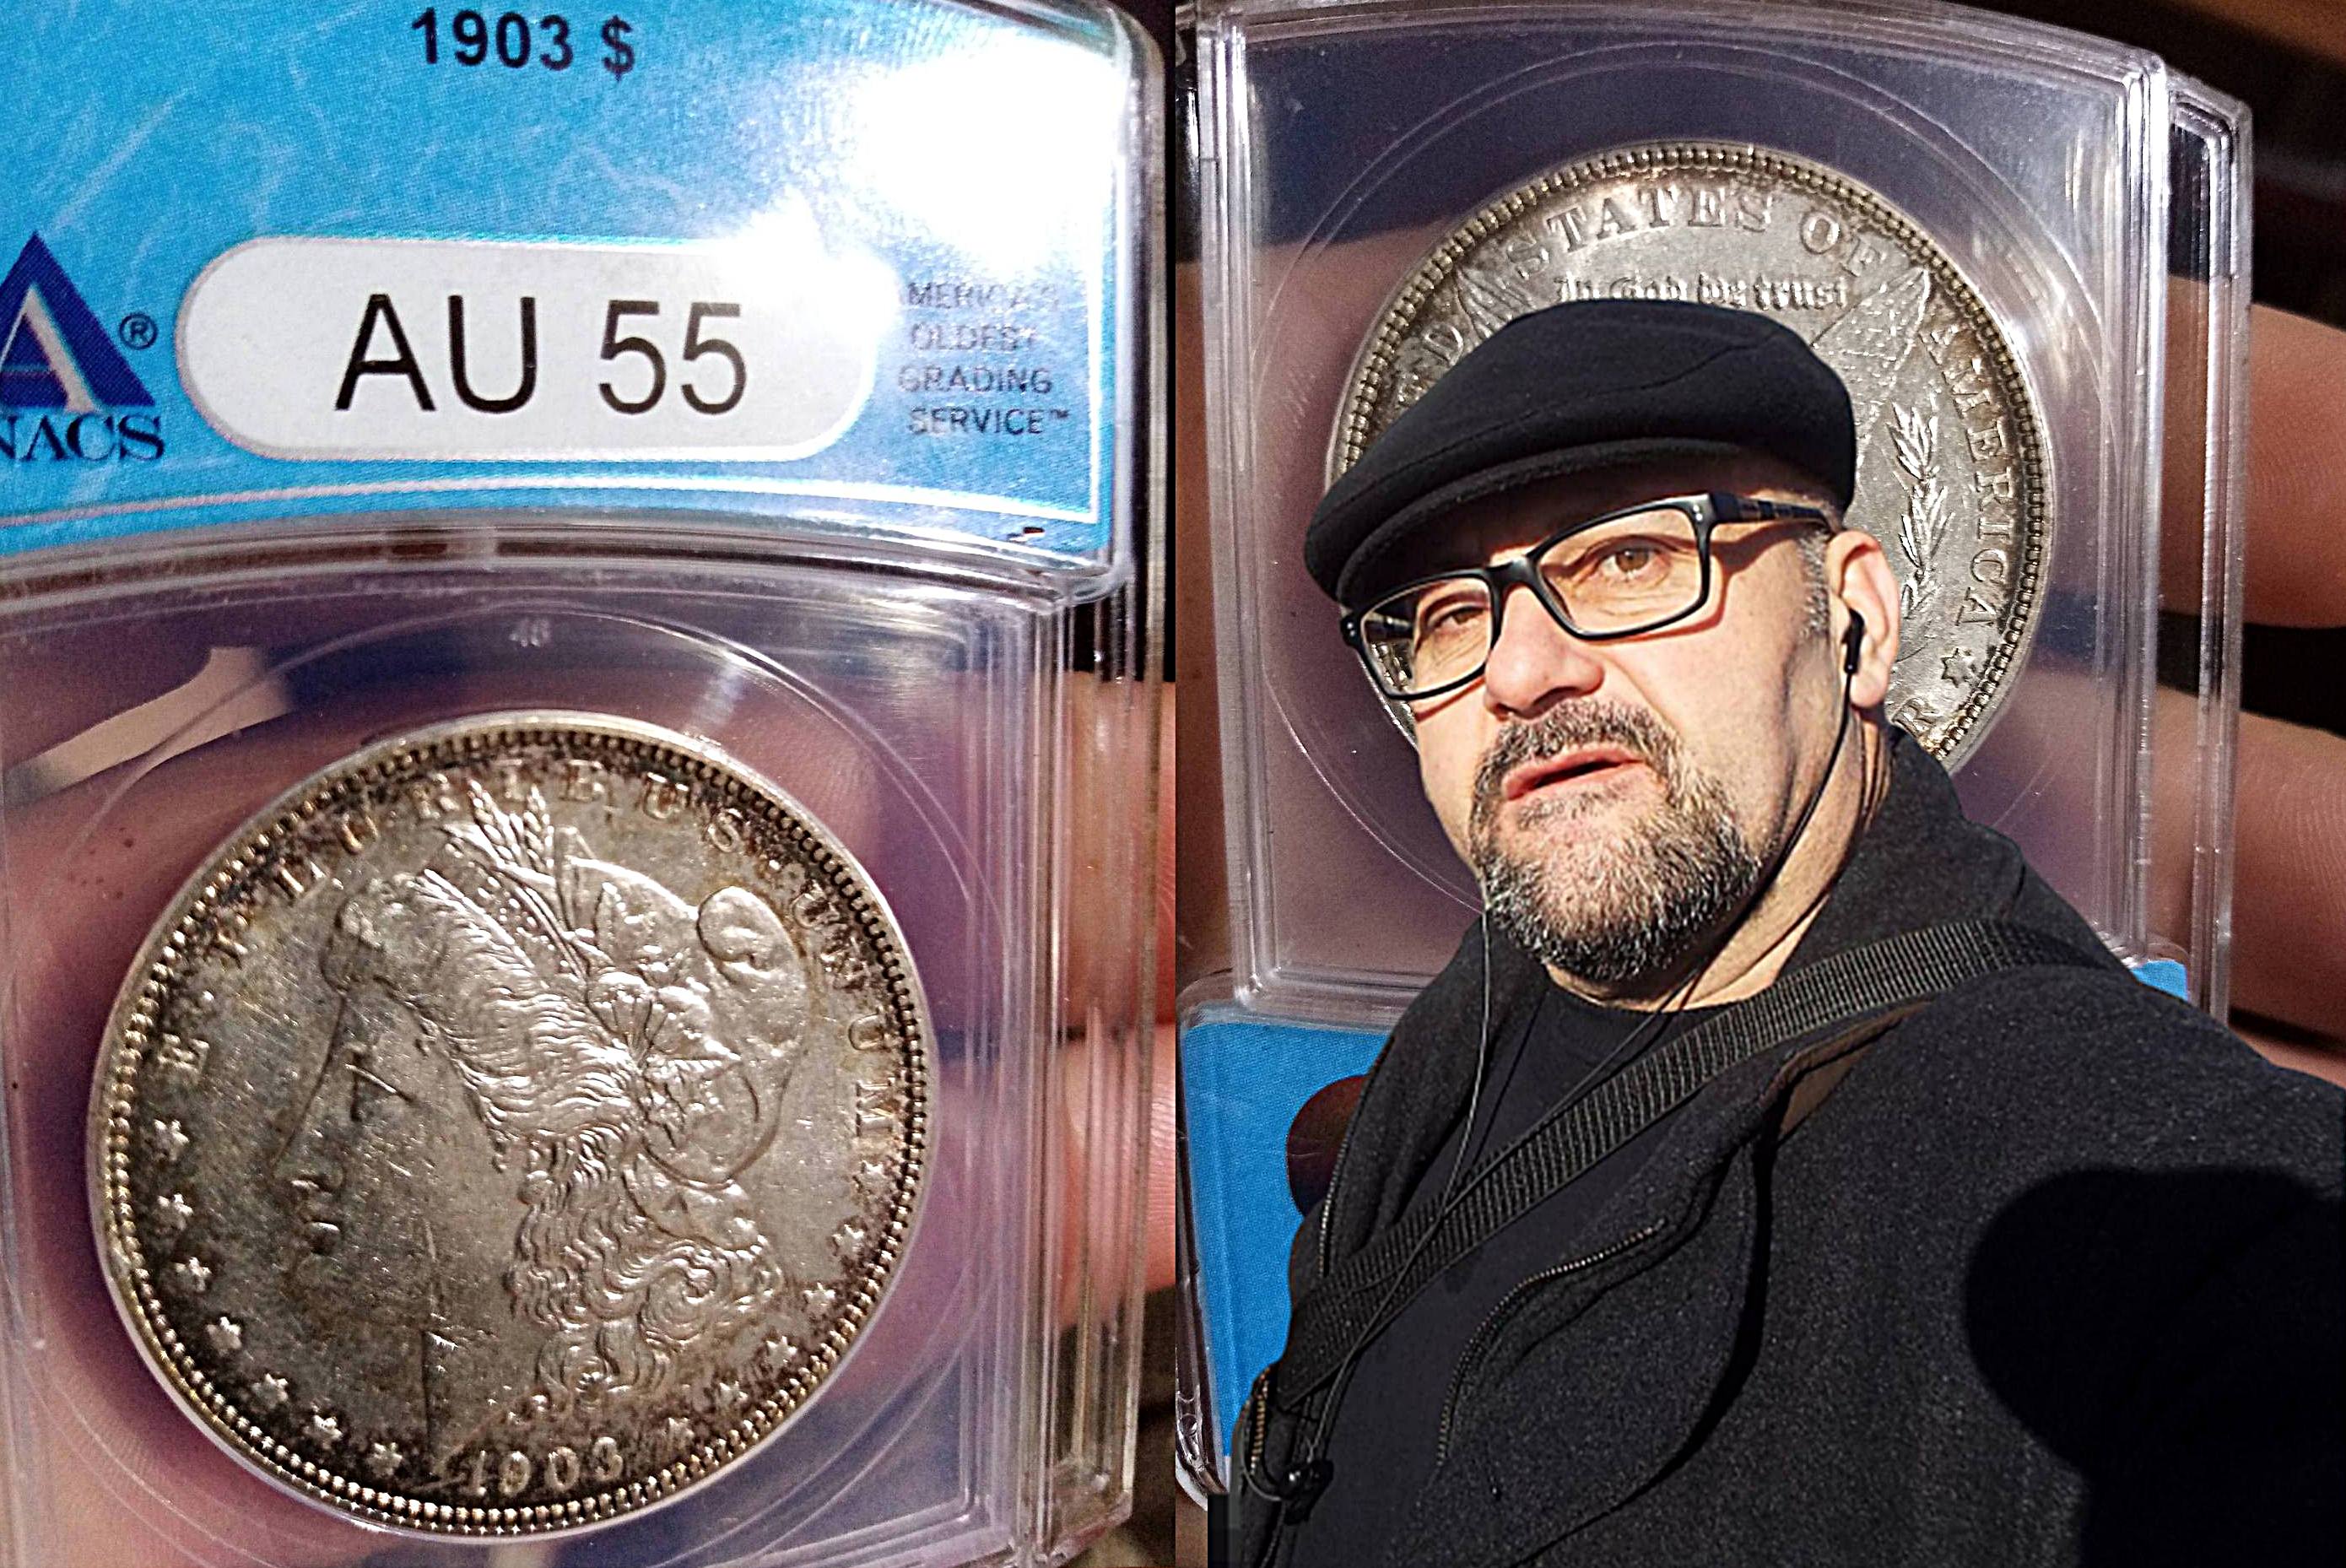 Stefan Proynov: Do you know why this coin is unique?